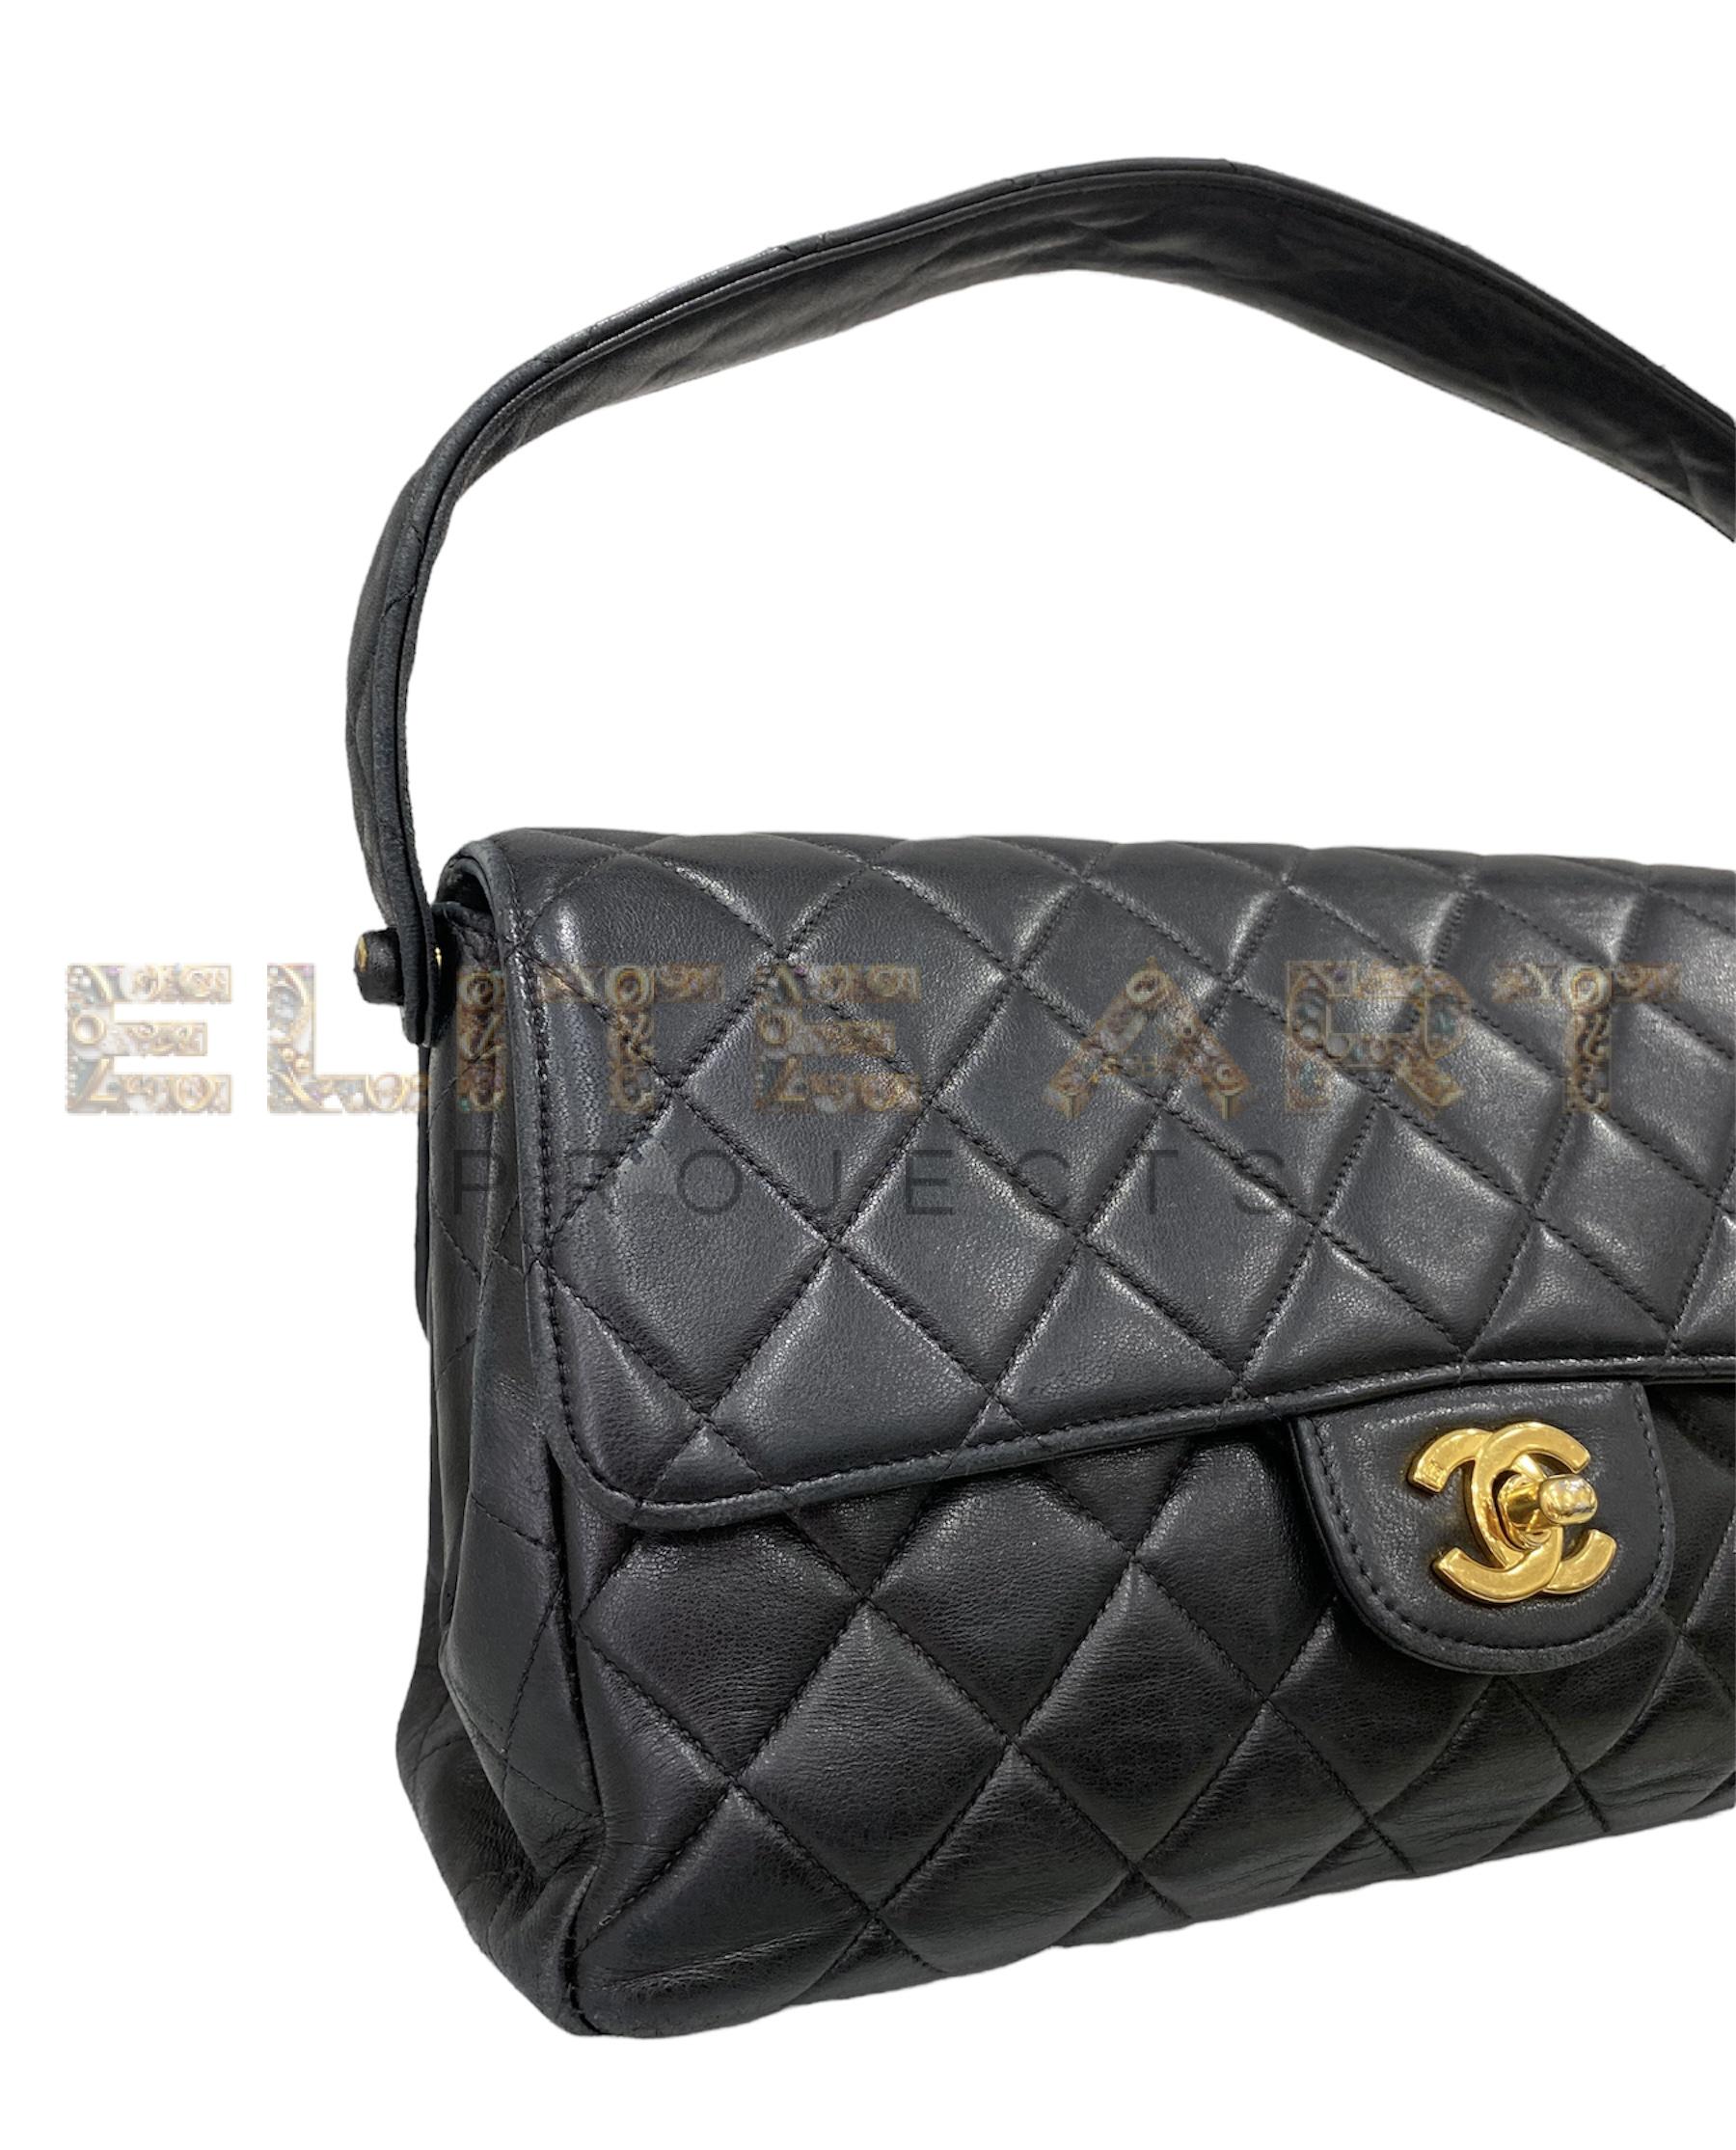 Chanel, 2.55 Double Face, handbag, quilted leather, golden hardware